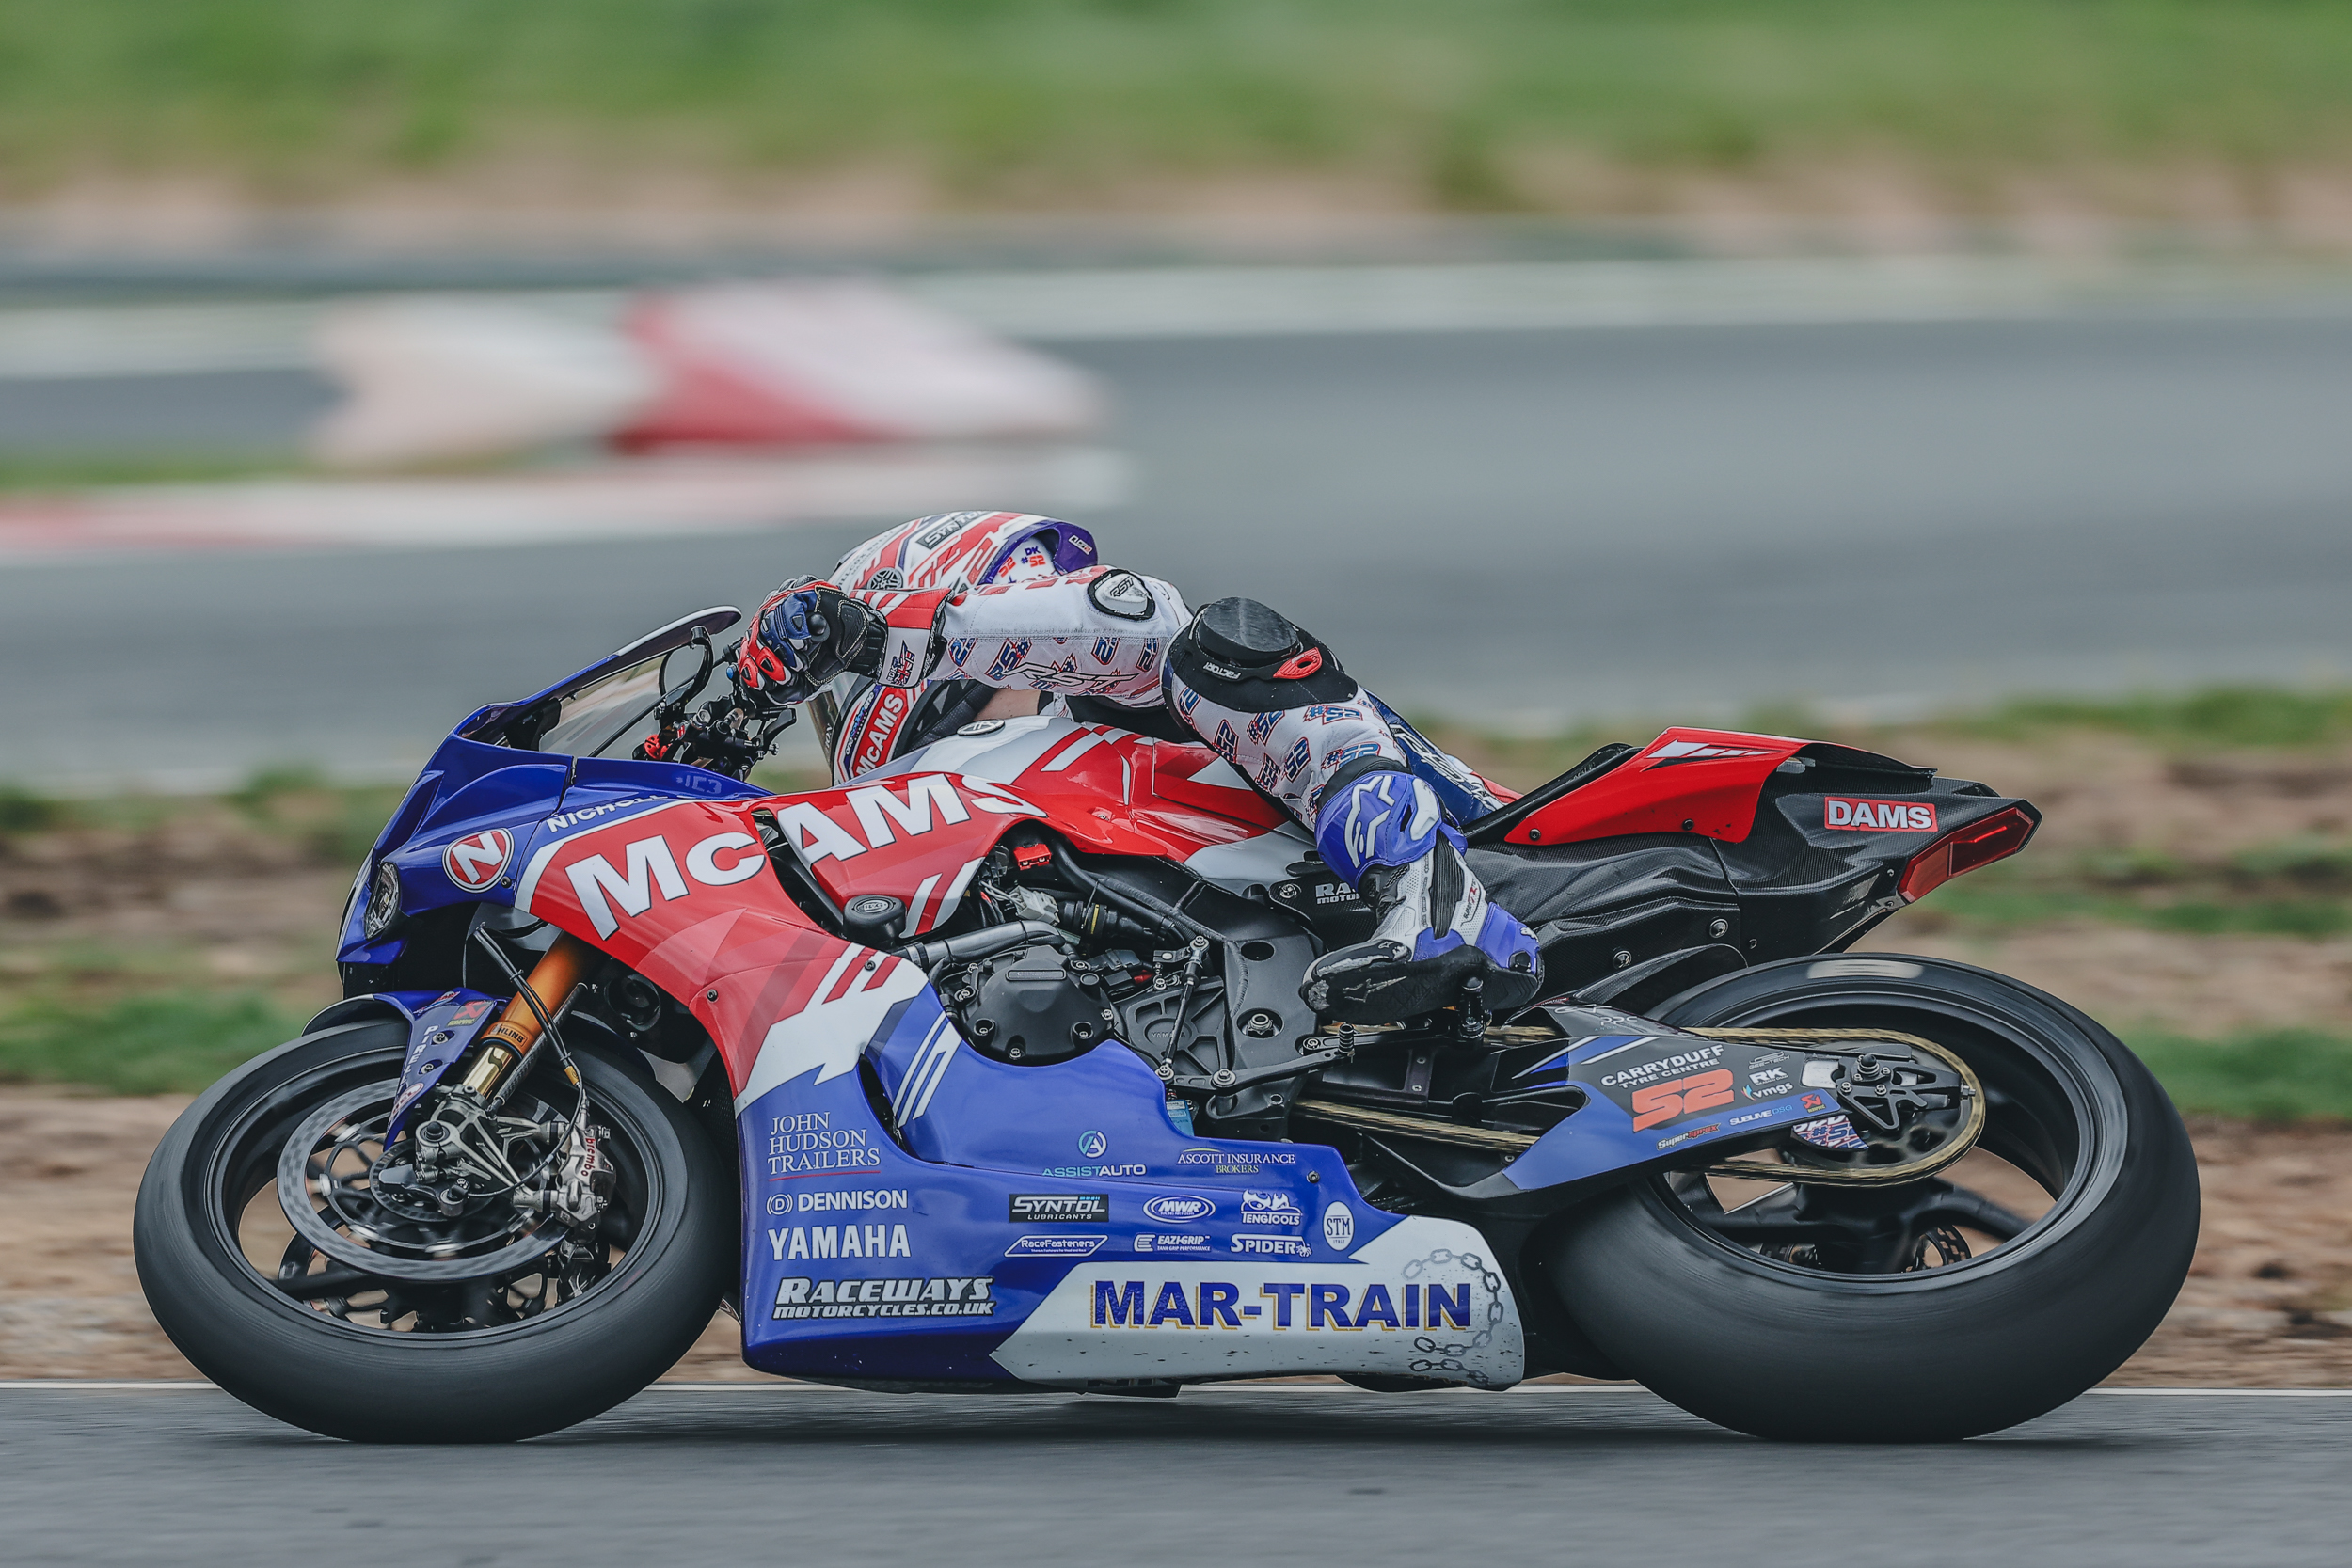 British Superbike Championship And Support Classes Deliver Intense Action In Season Opening Day At Circuito De Navarra